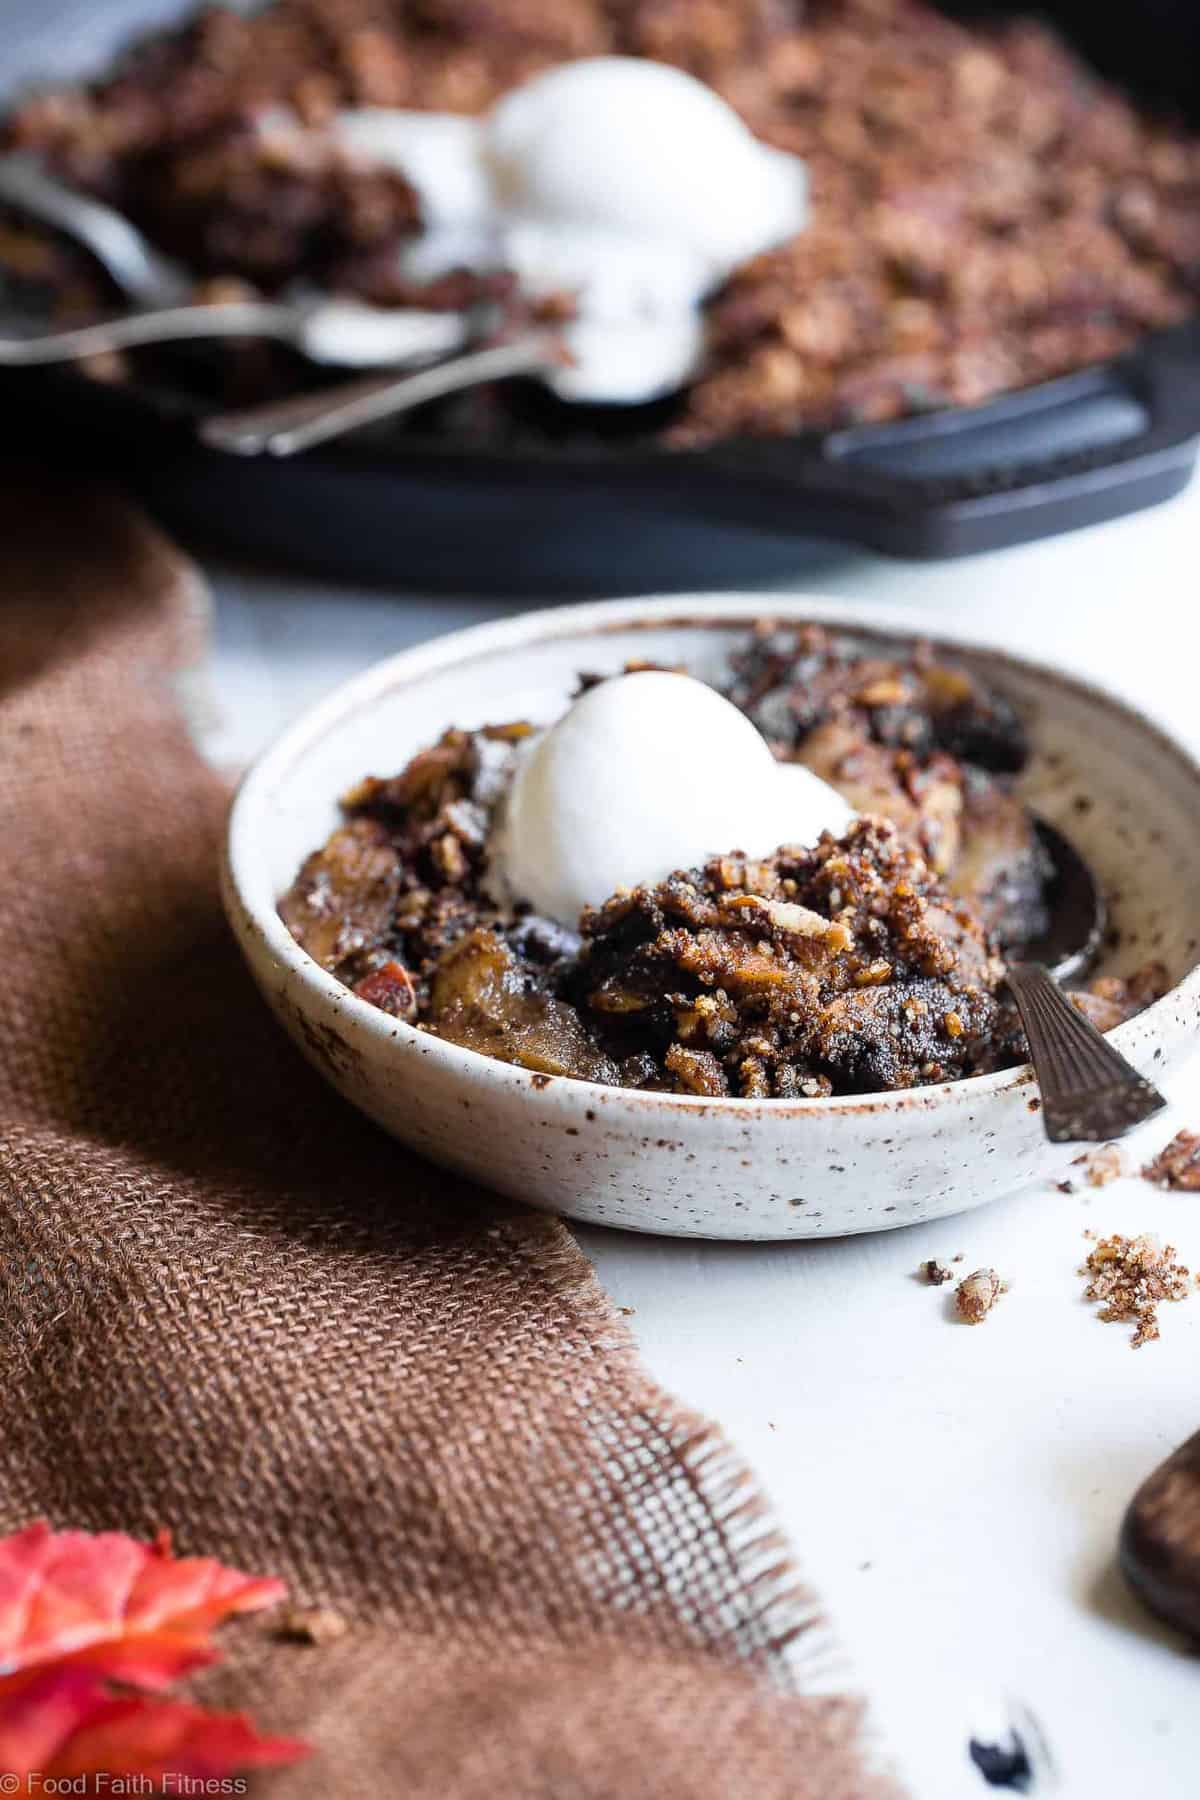 The BEST Paleo Vegan Apple Crisp with Coconut Flour - This coconut flour apple crisp is an EASY, cozy fall dessert made with simple, wholesome ingredients! Perfectly crispy, and spicy-sweet that you won't believe it's gluten free, dairy free and better for you! | #Foodfaithfitness | #Vegan #Paleo #Healthy #Glutenfree #Dairyfree